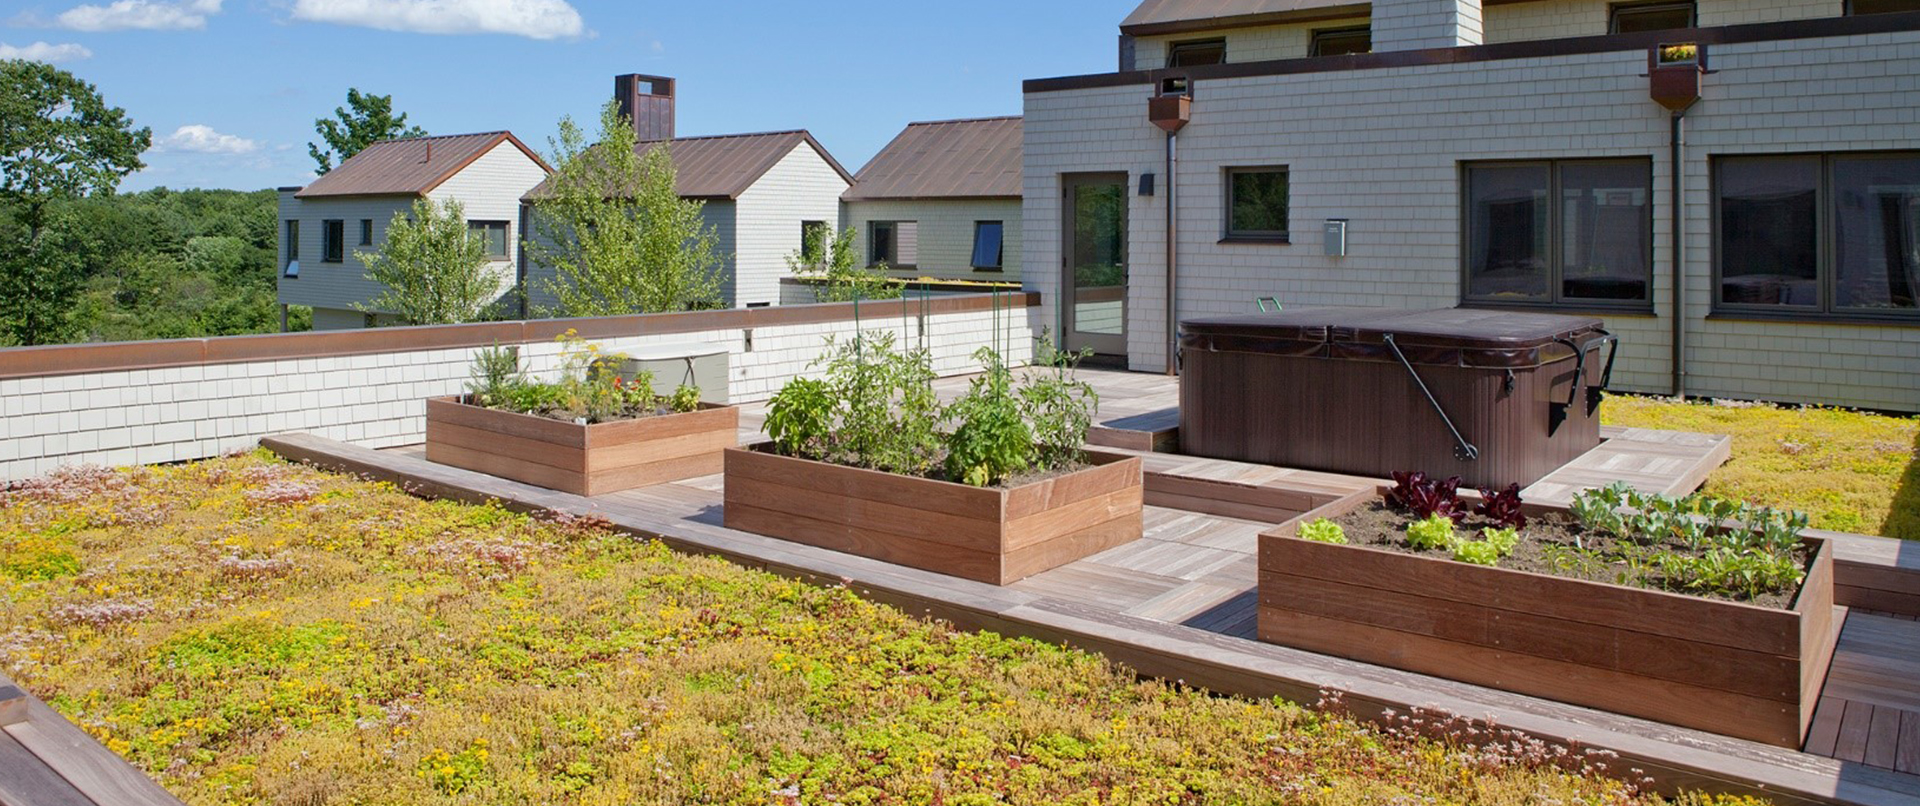 Practical Rooftop Space with Planters